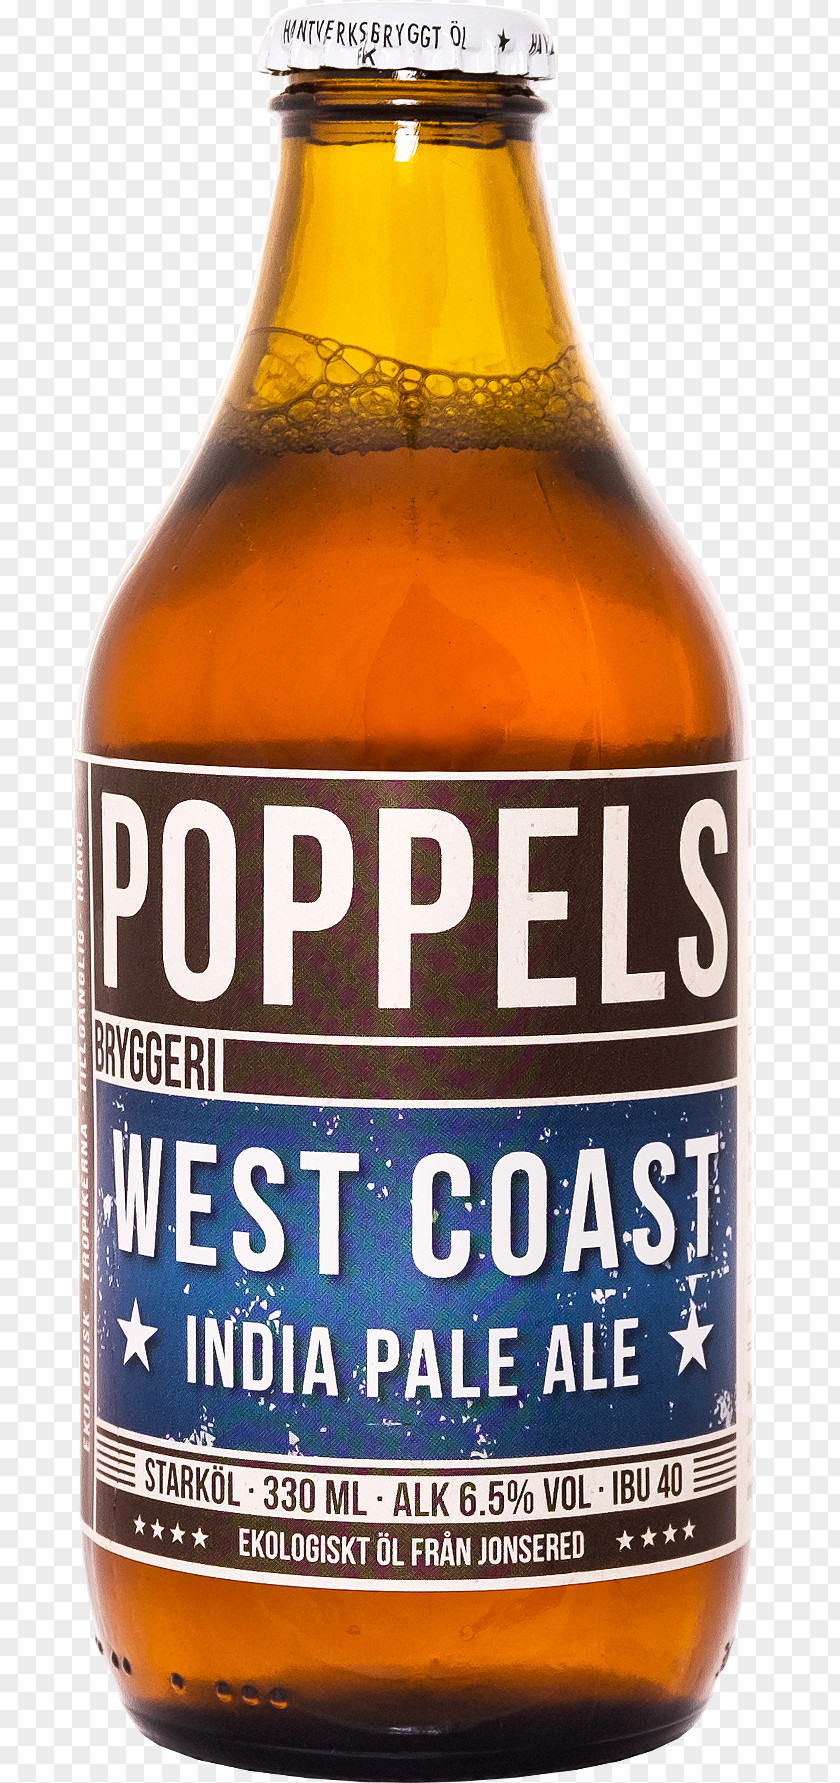 West Coast Beer Bottle India Pale Ale Russian Imperial Stout Poppels Brewery PNG